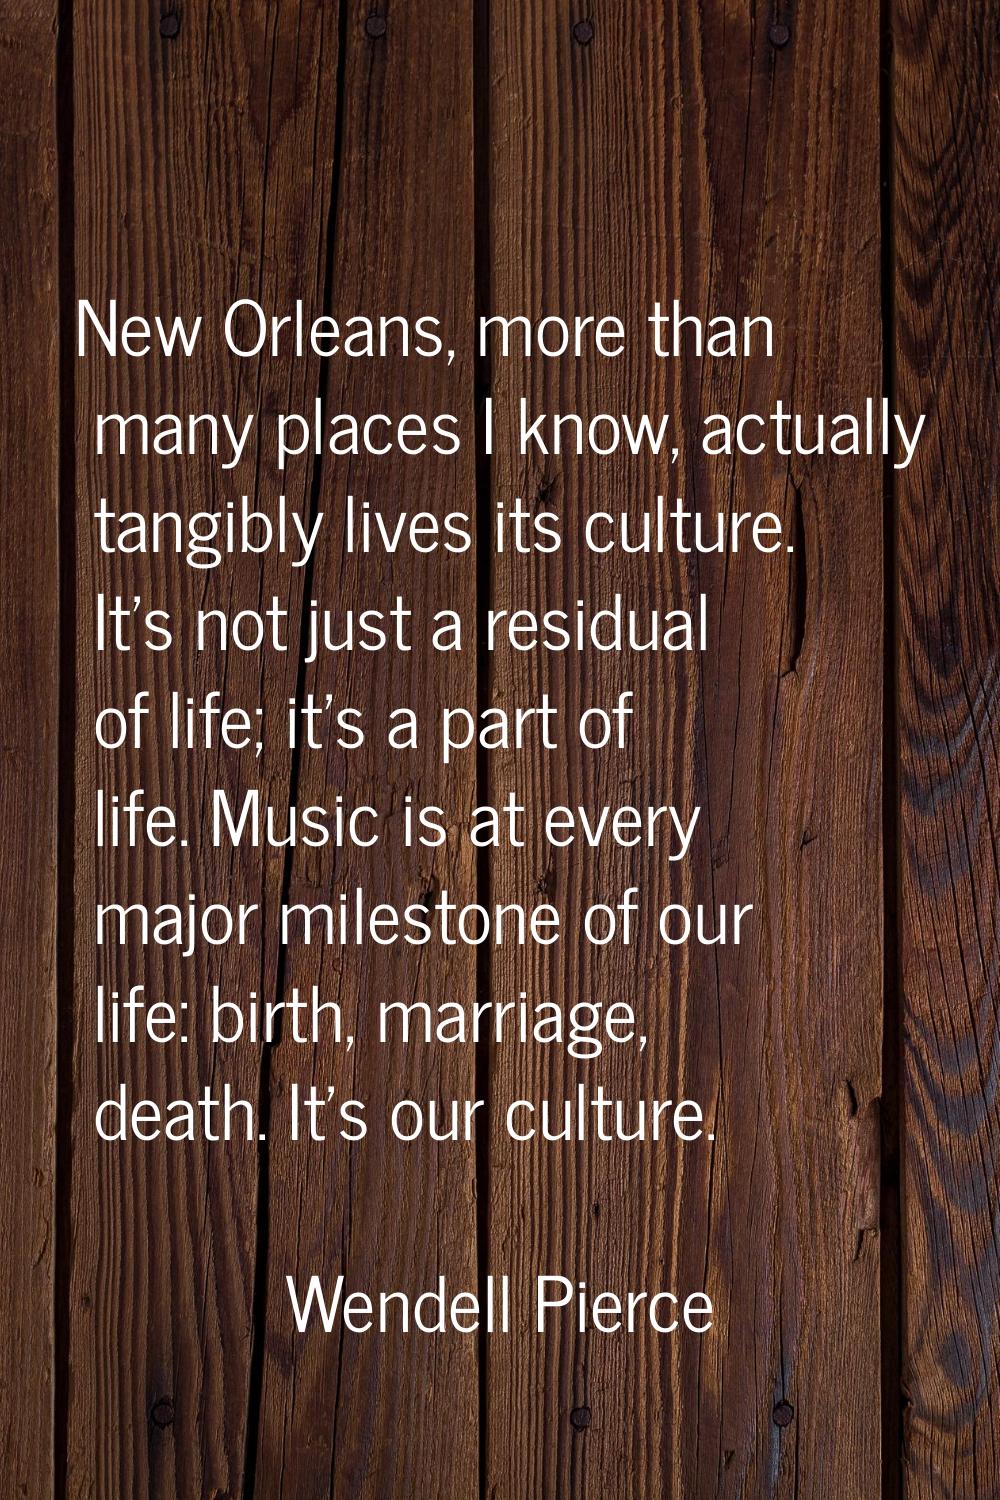 New Orleans, more than many places I know, actually tangibly lives its culture. It's not just a res